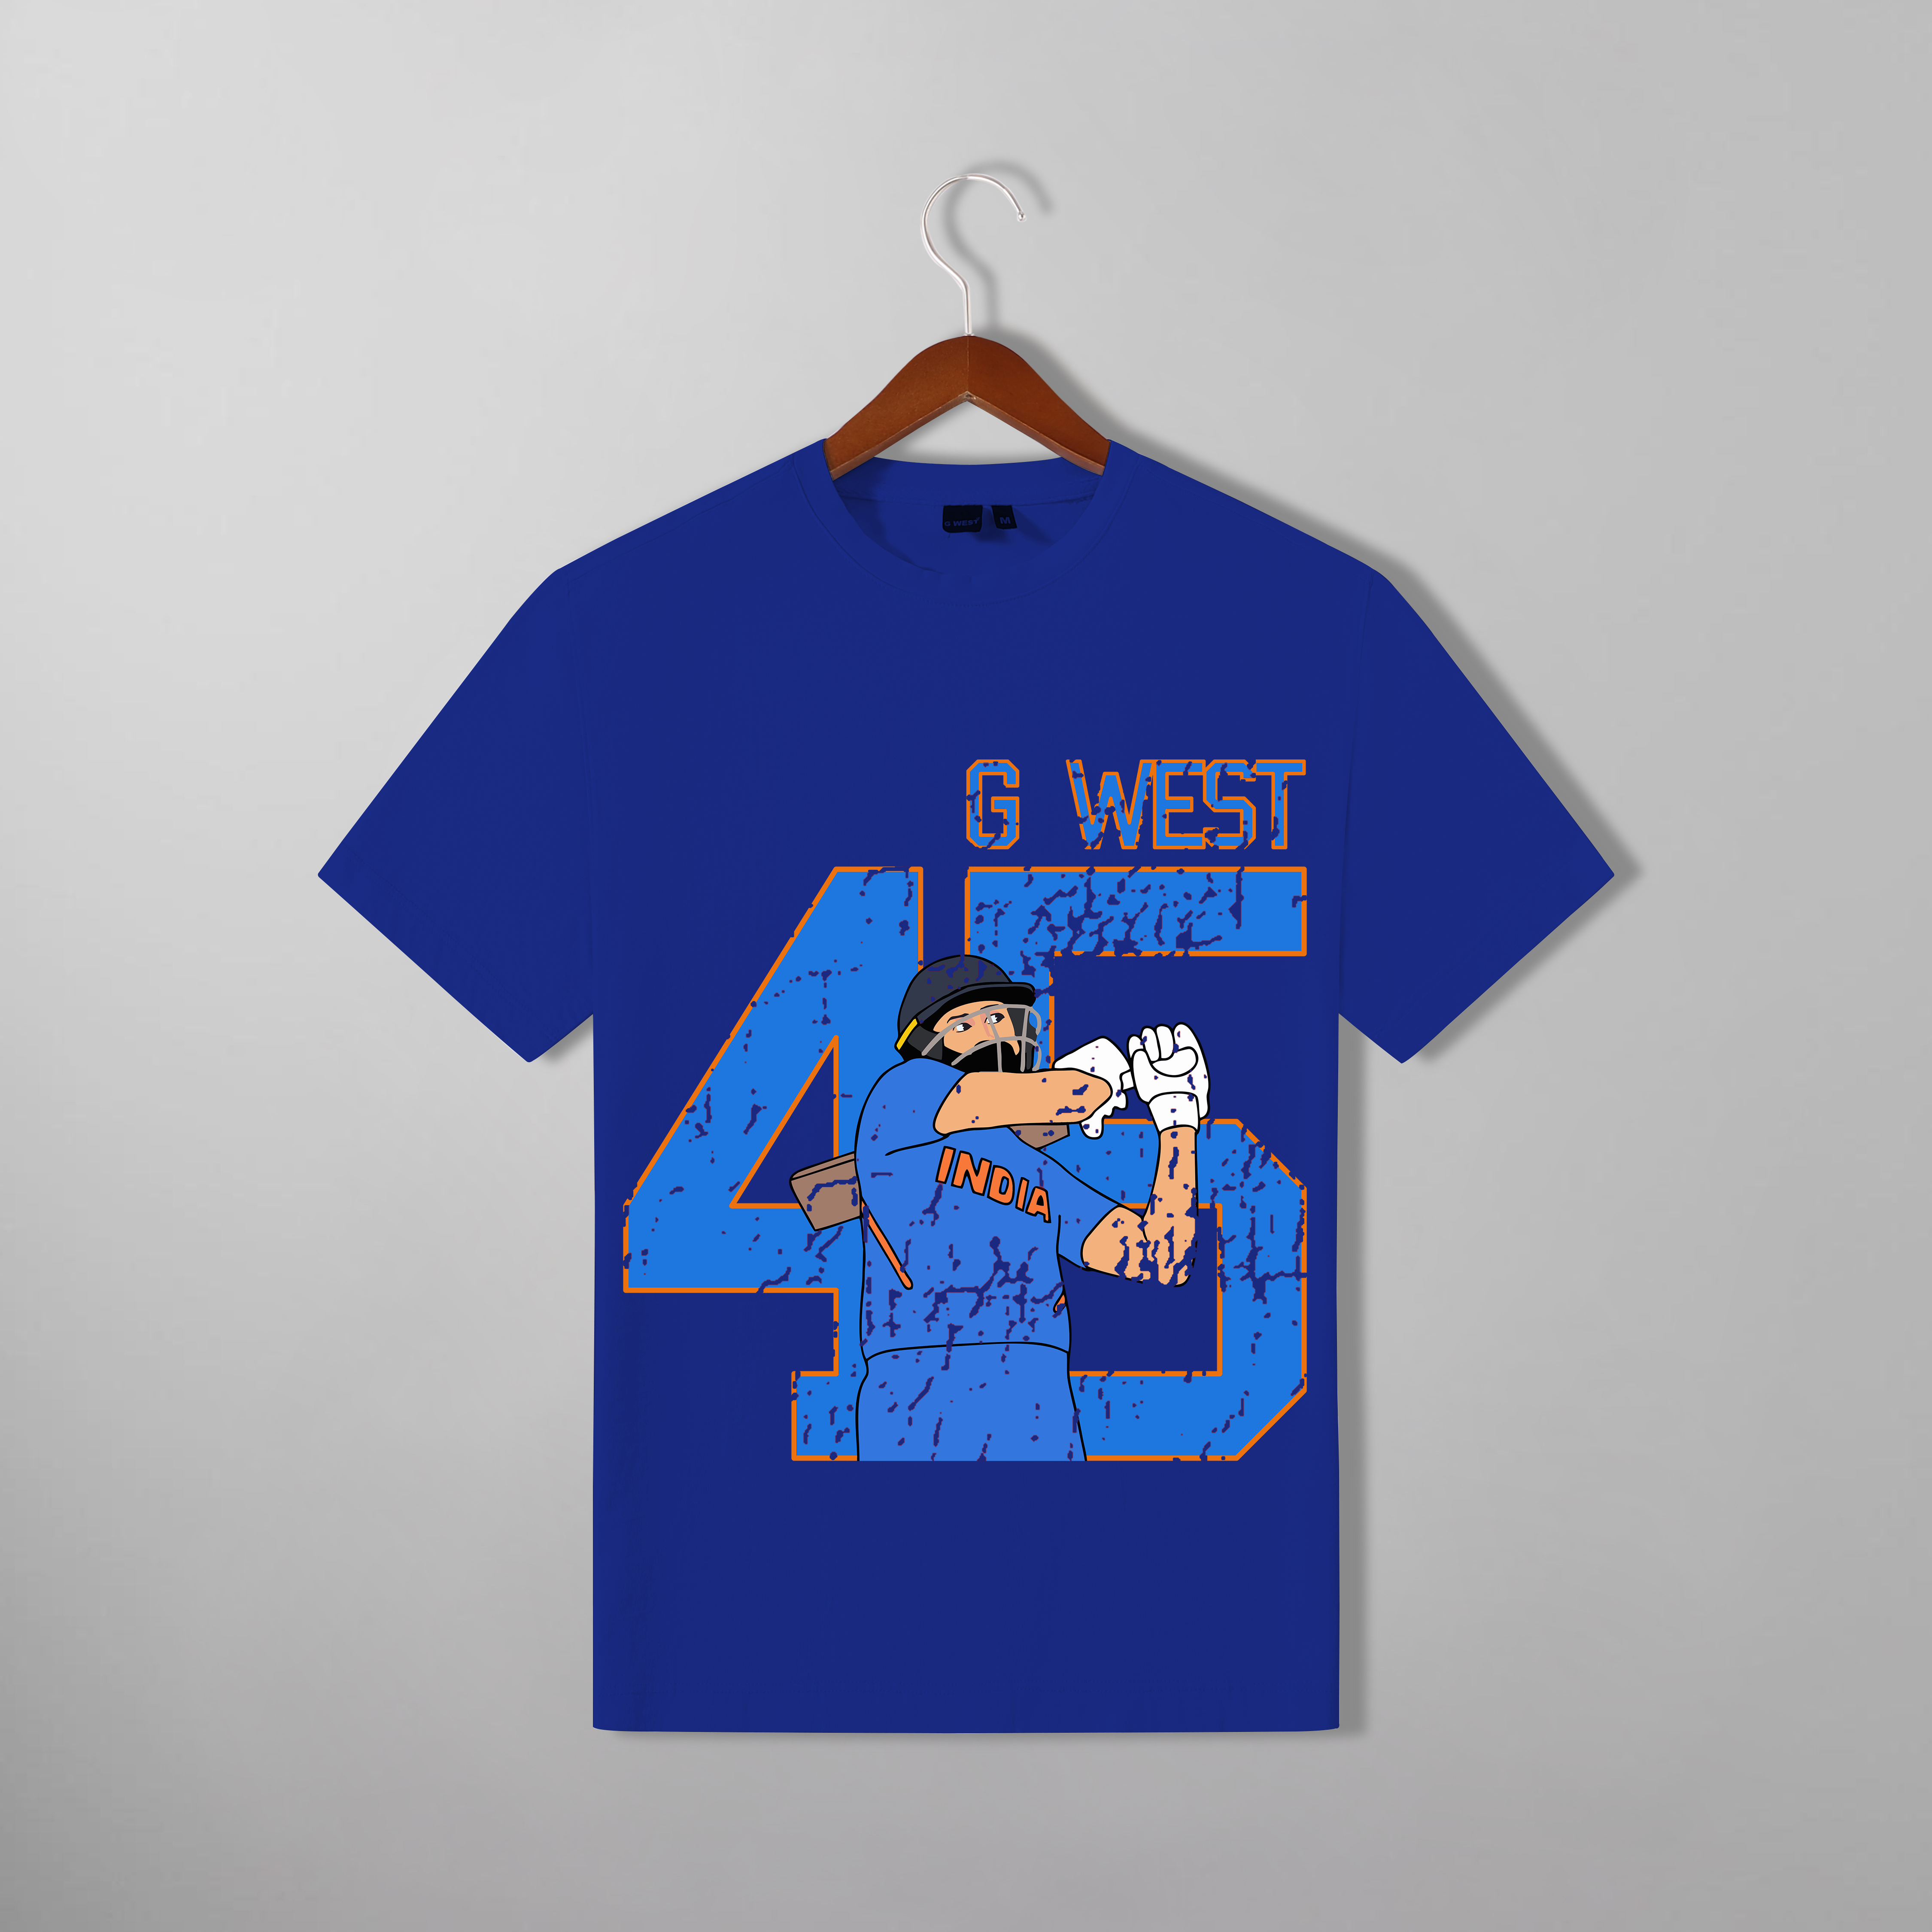 G West Cricket India King-45 T-Shirt : GWDTFL2410 - 3 COLORS